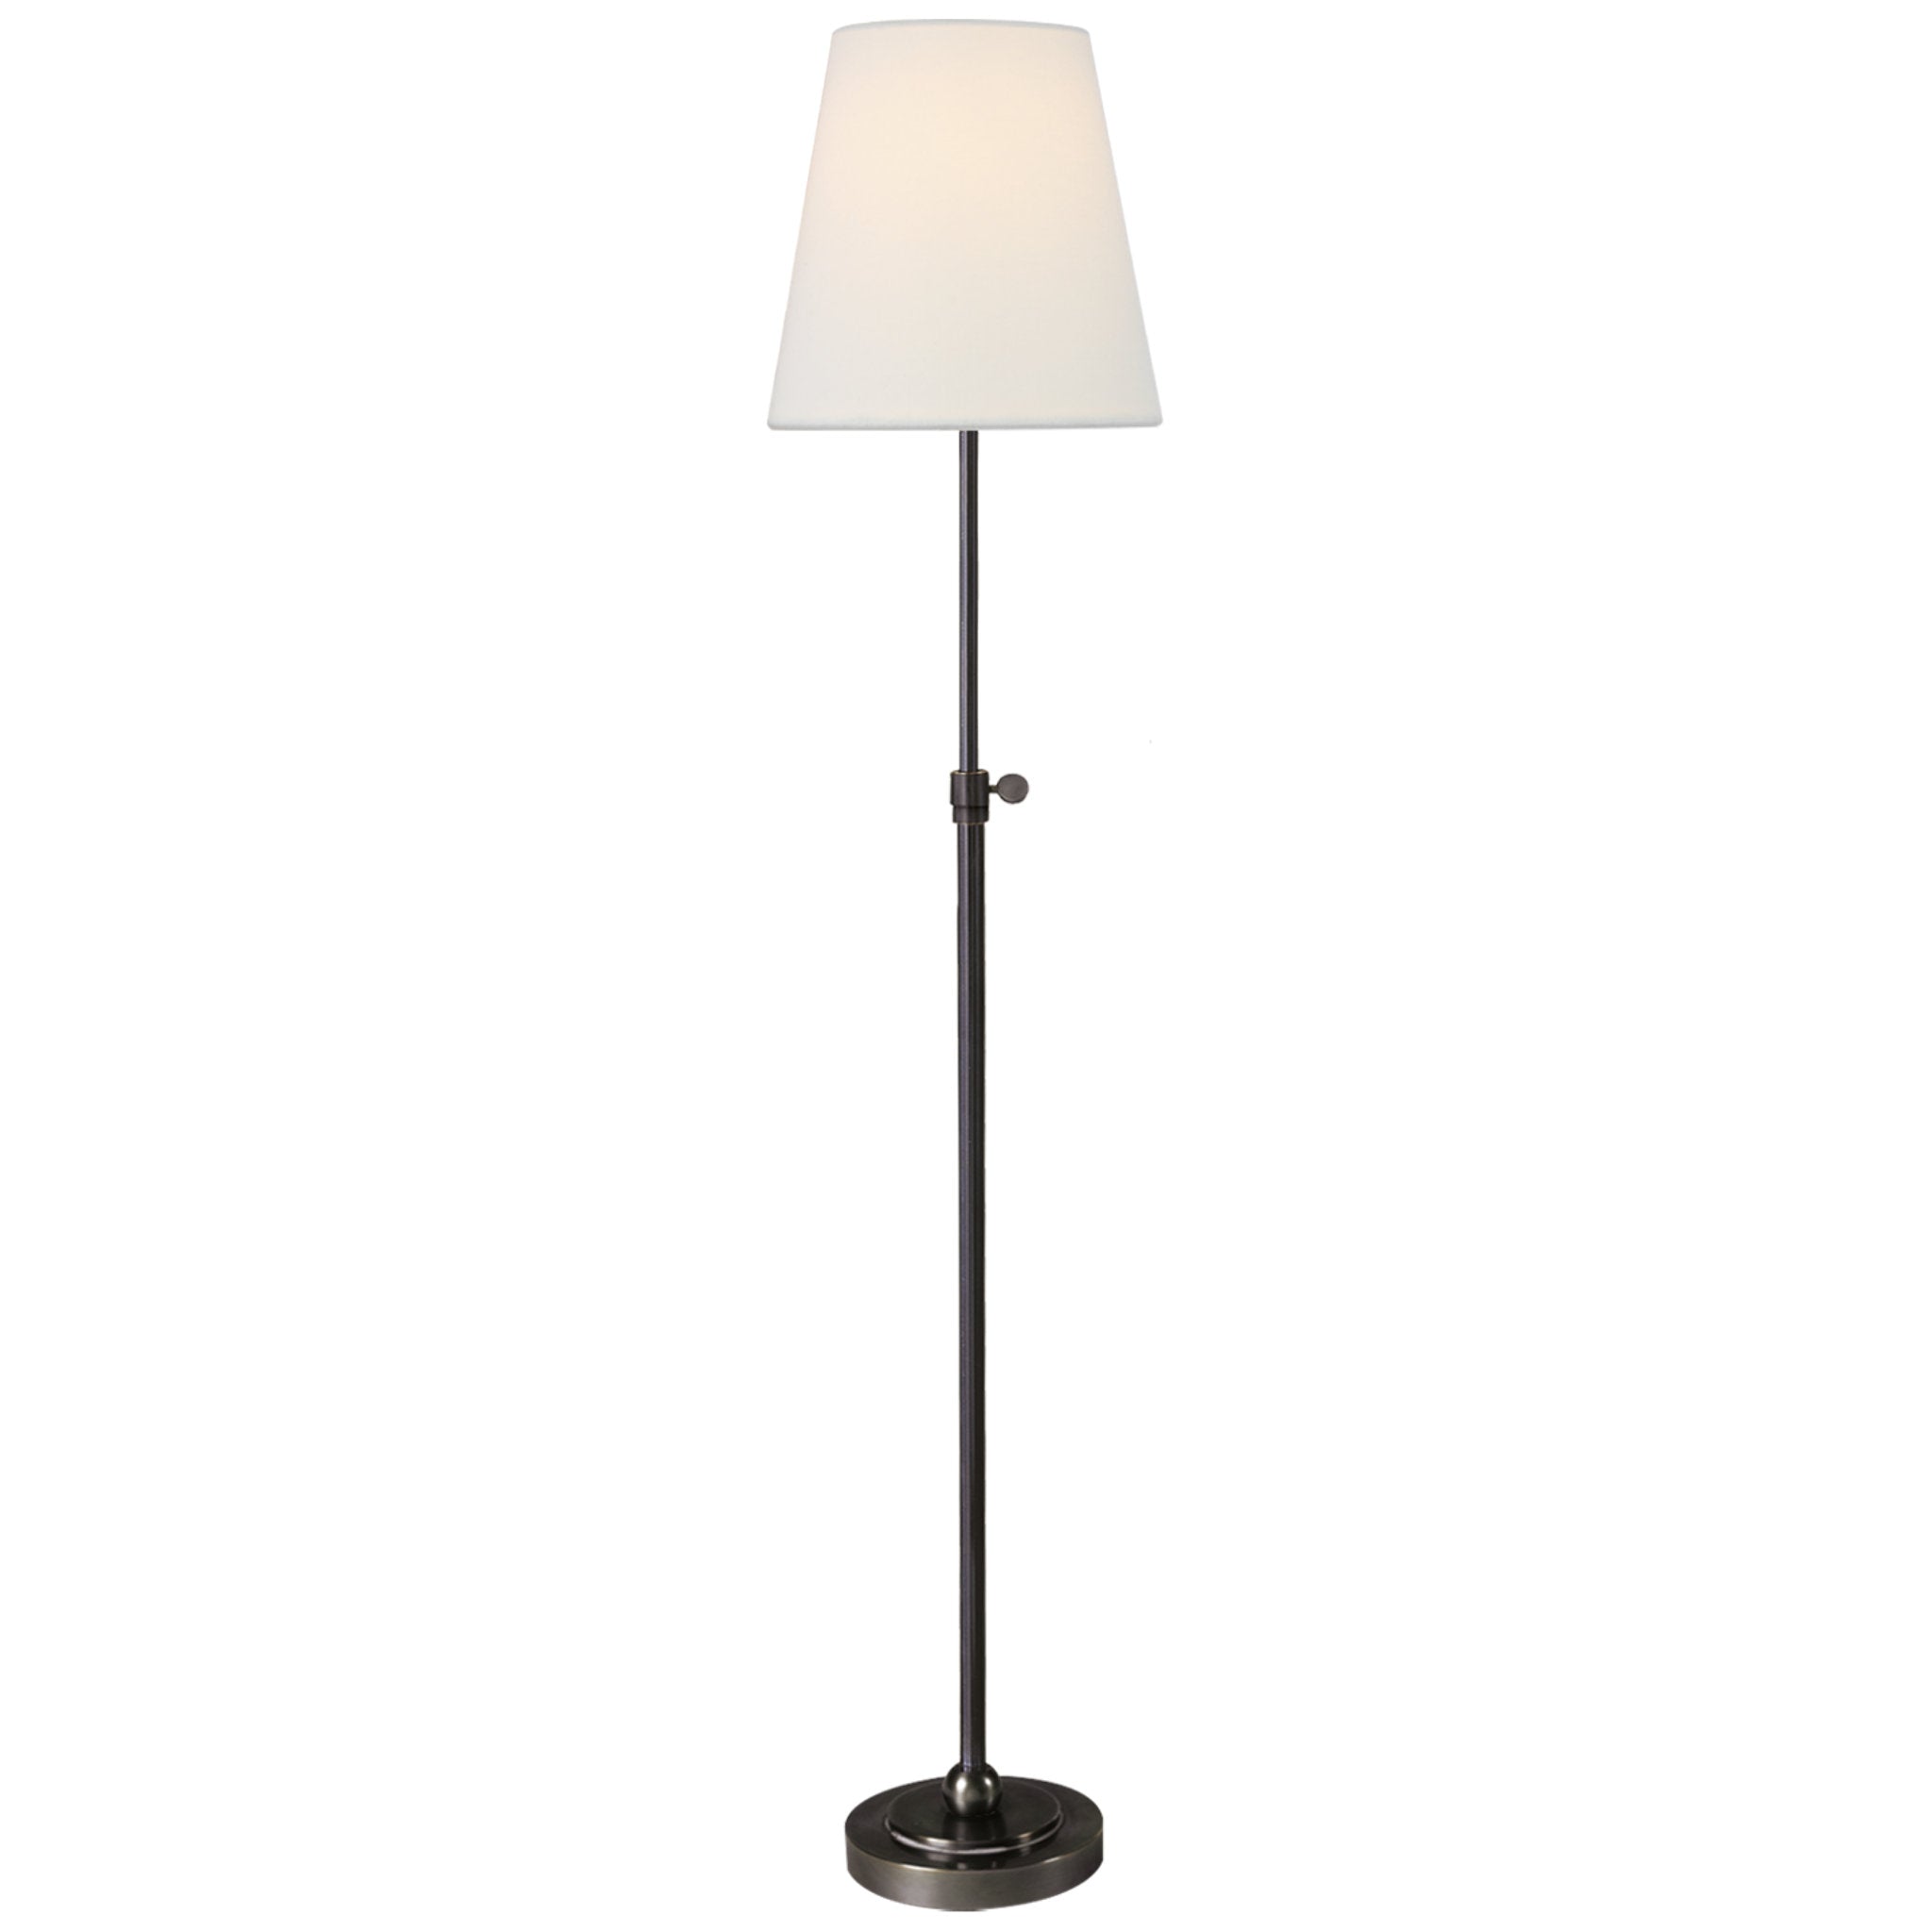 Thomas O'Brien Bryant Table Lamp in Bronze with Linen Shade